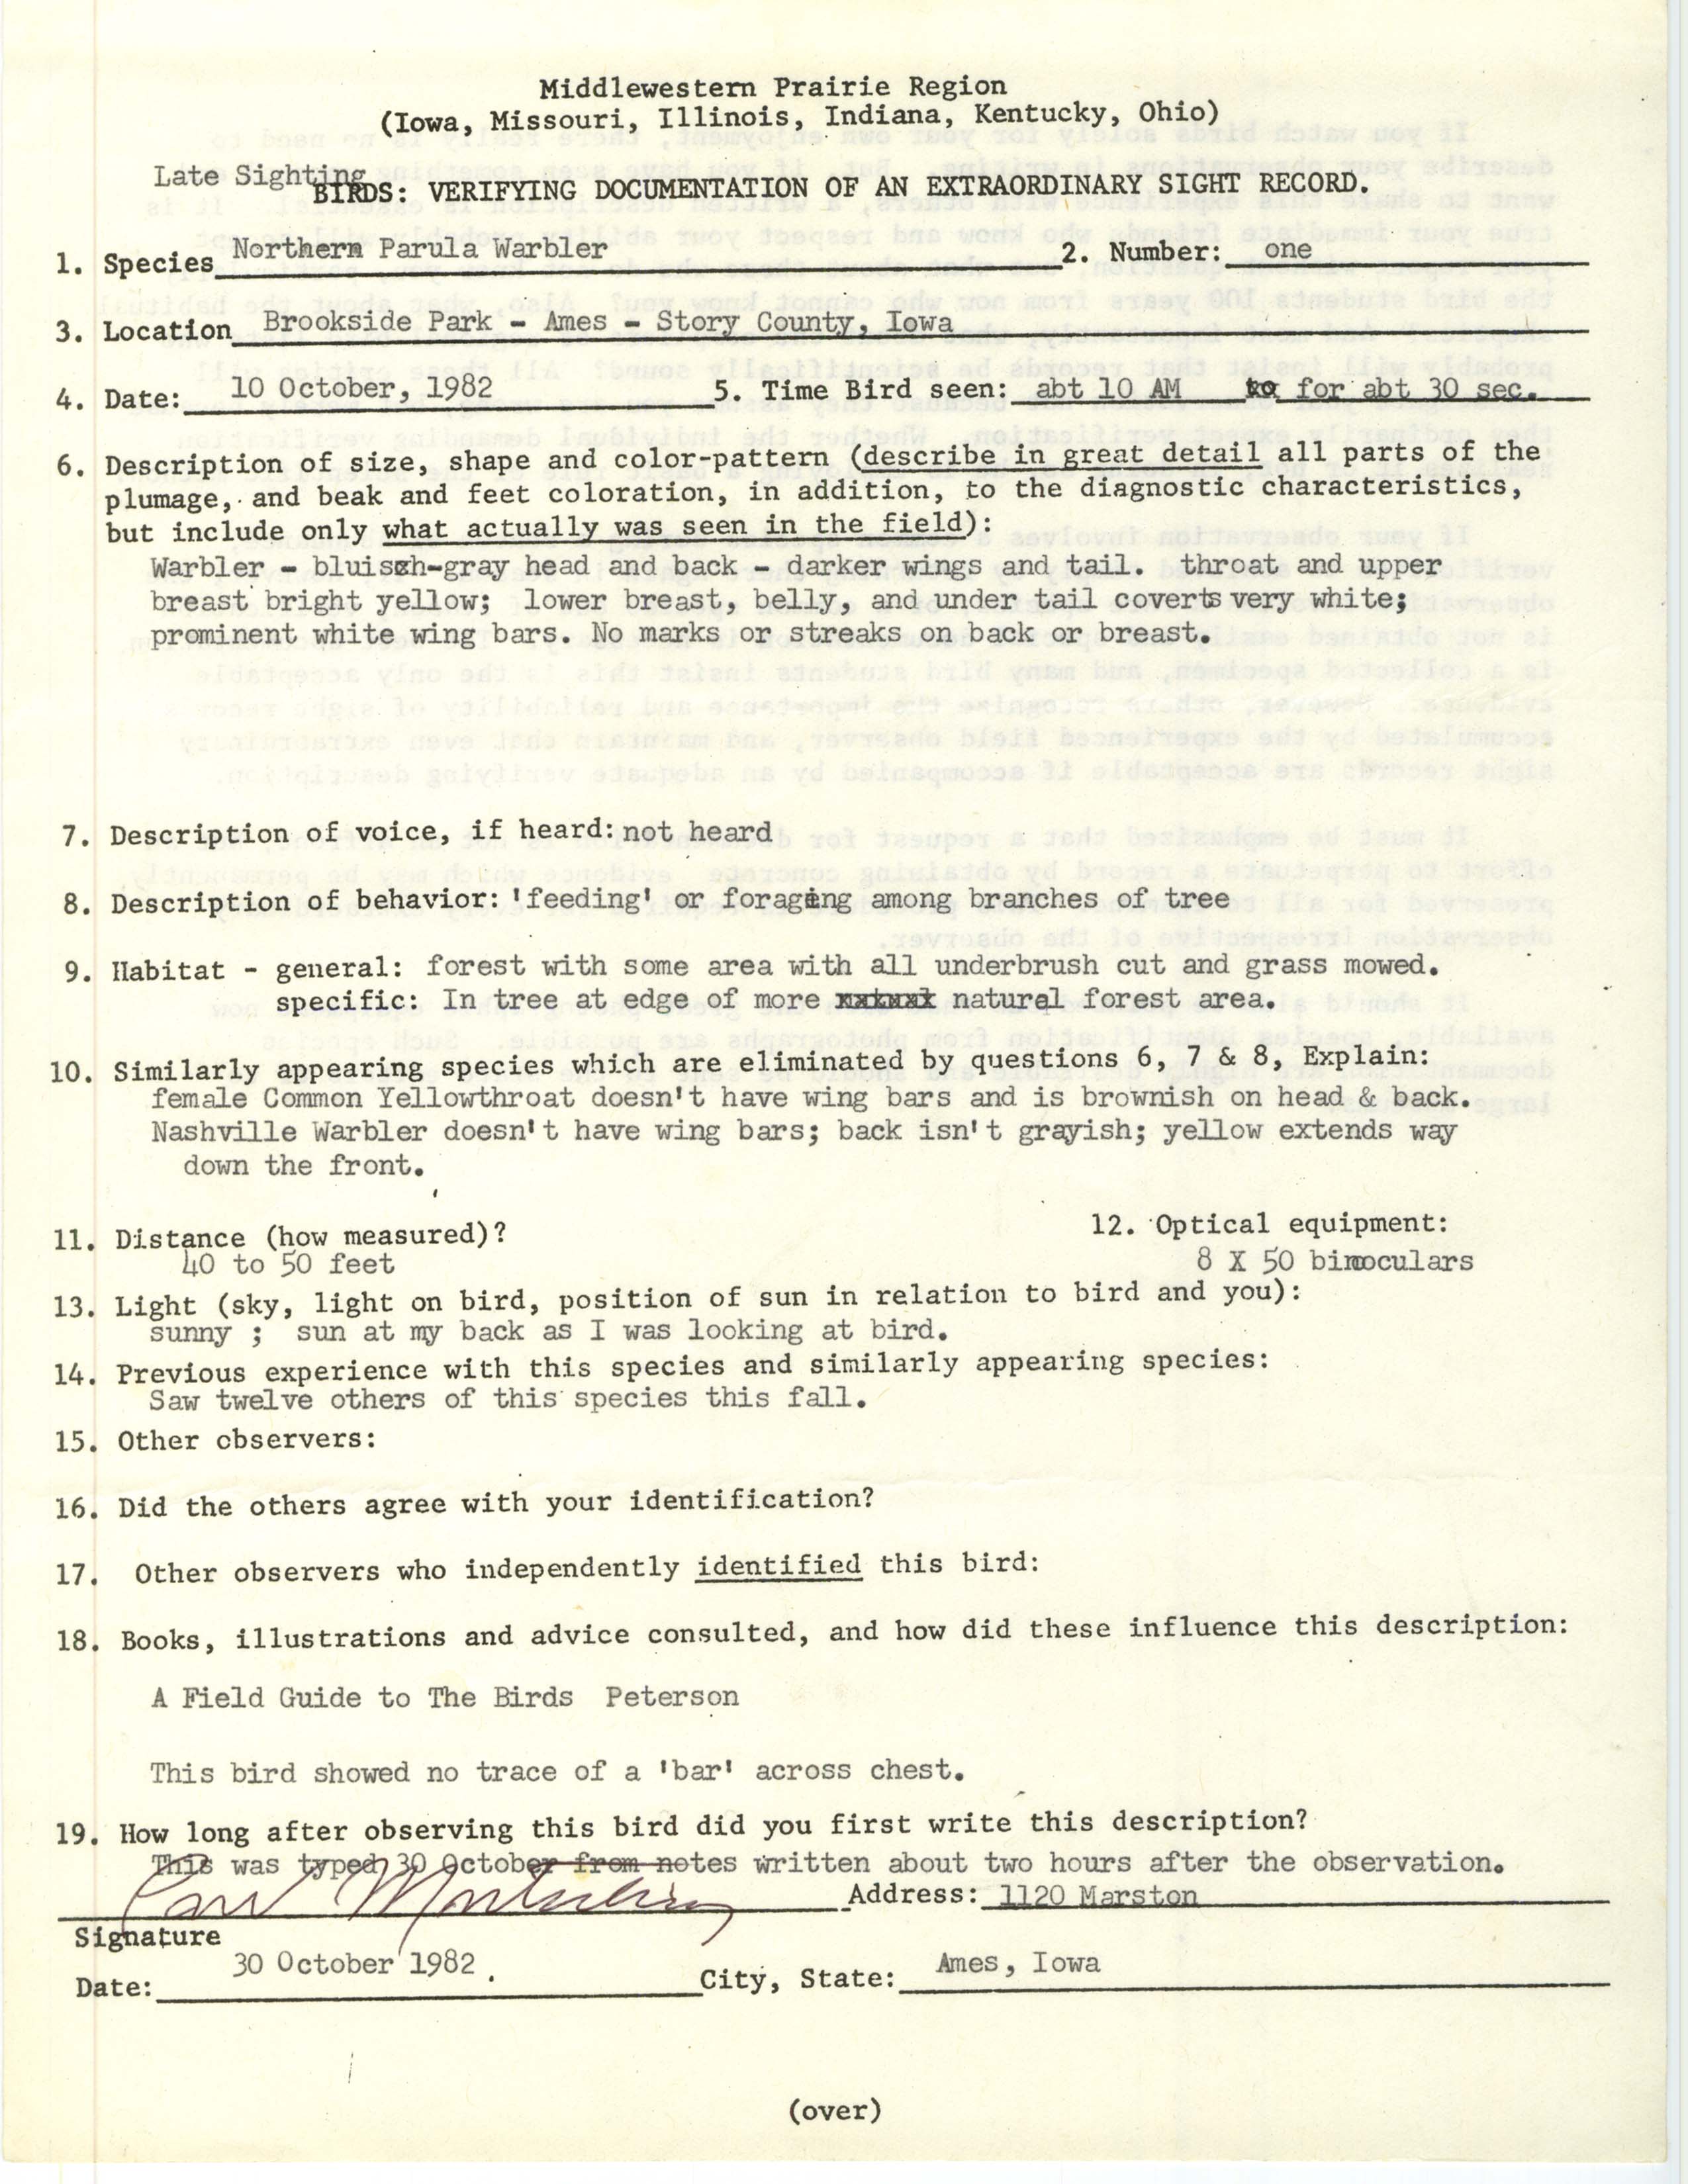 Rare bird documentation form for Northern Parula at Brookside Park in Ames, 1982